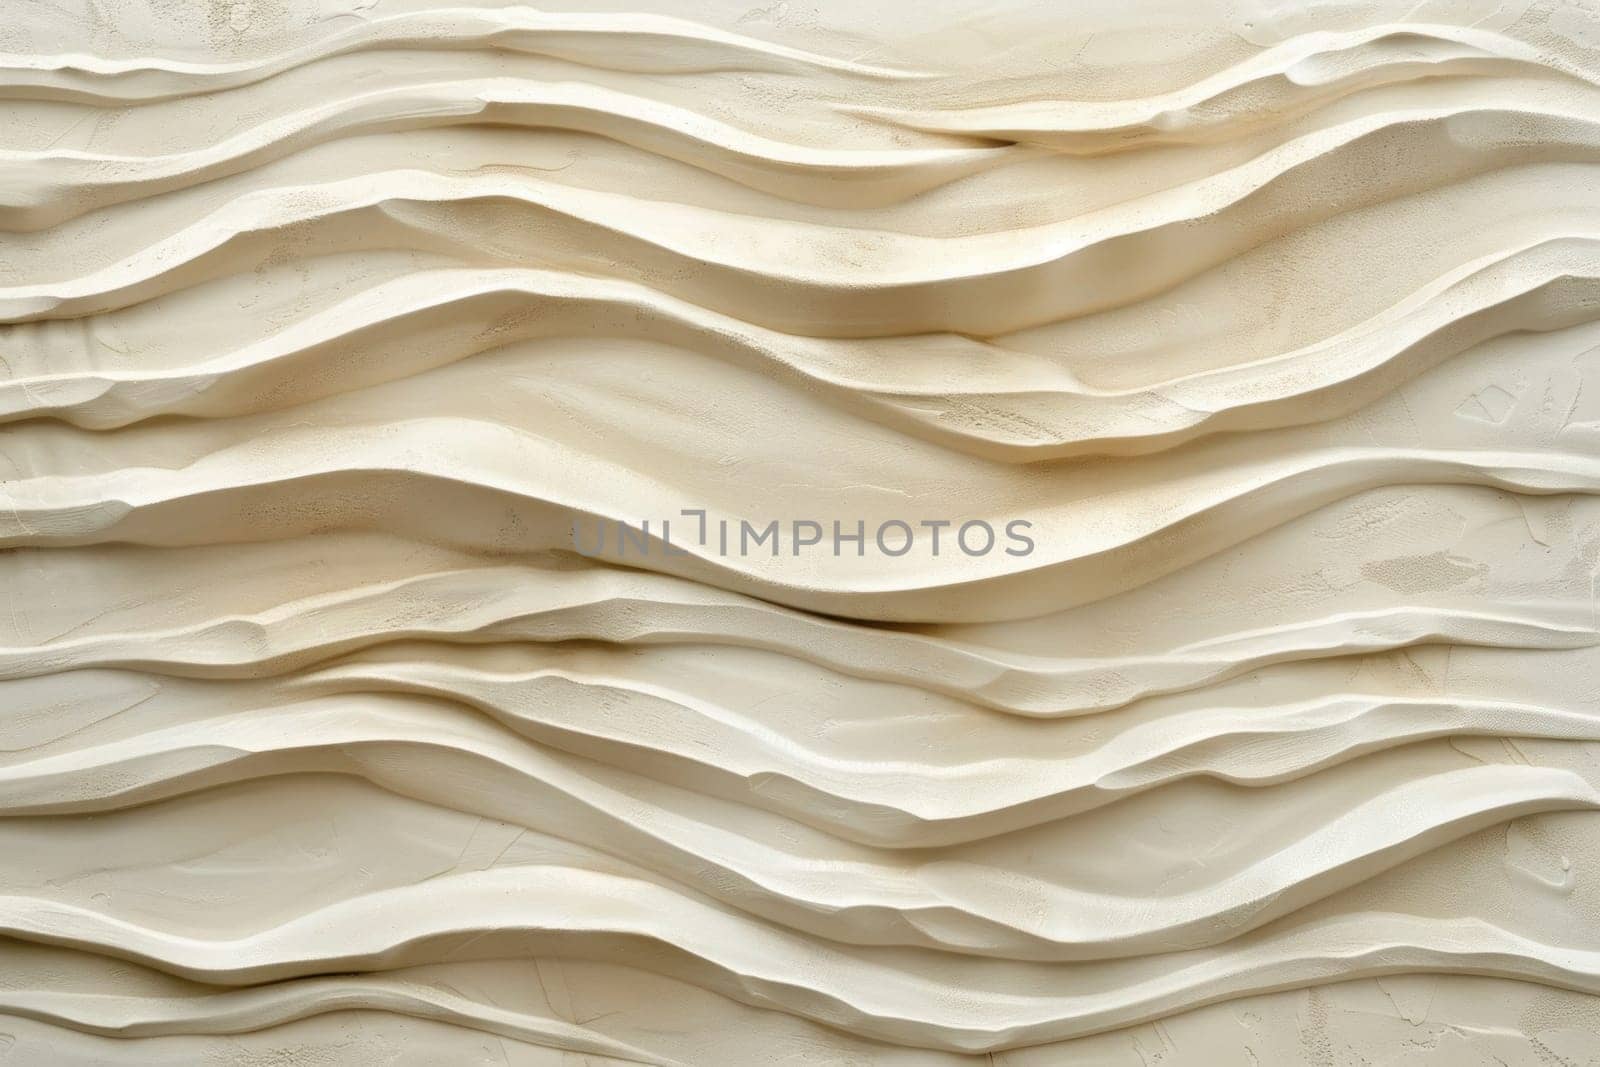 Intricate wavy pattern wall texture background for design projects, interior decor, architecture, and more